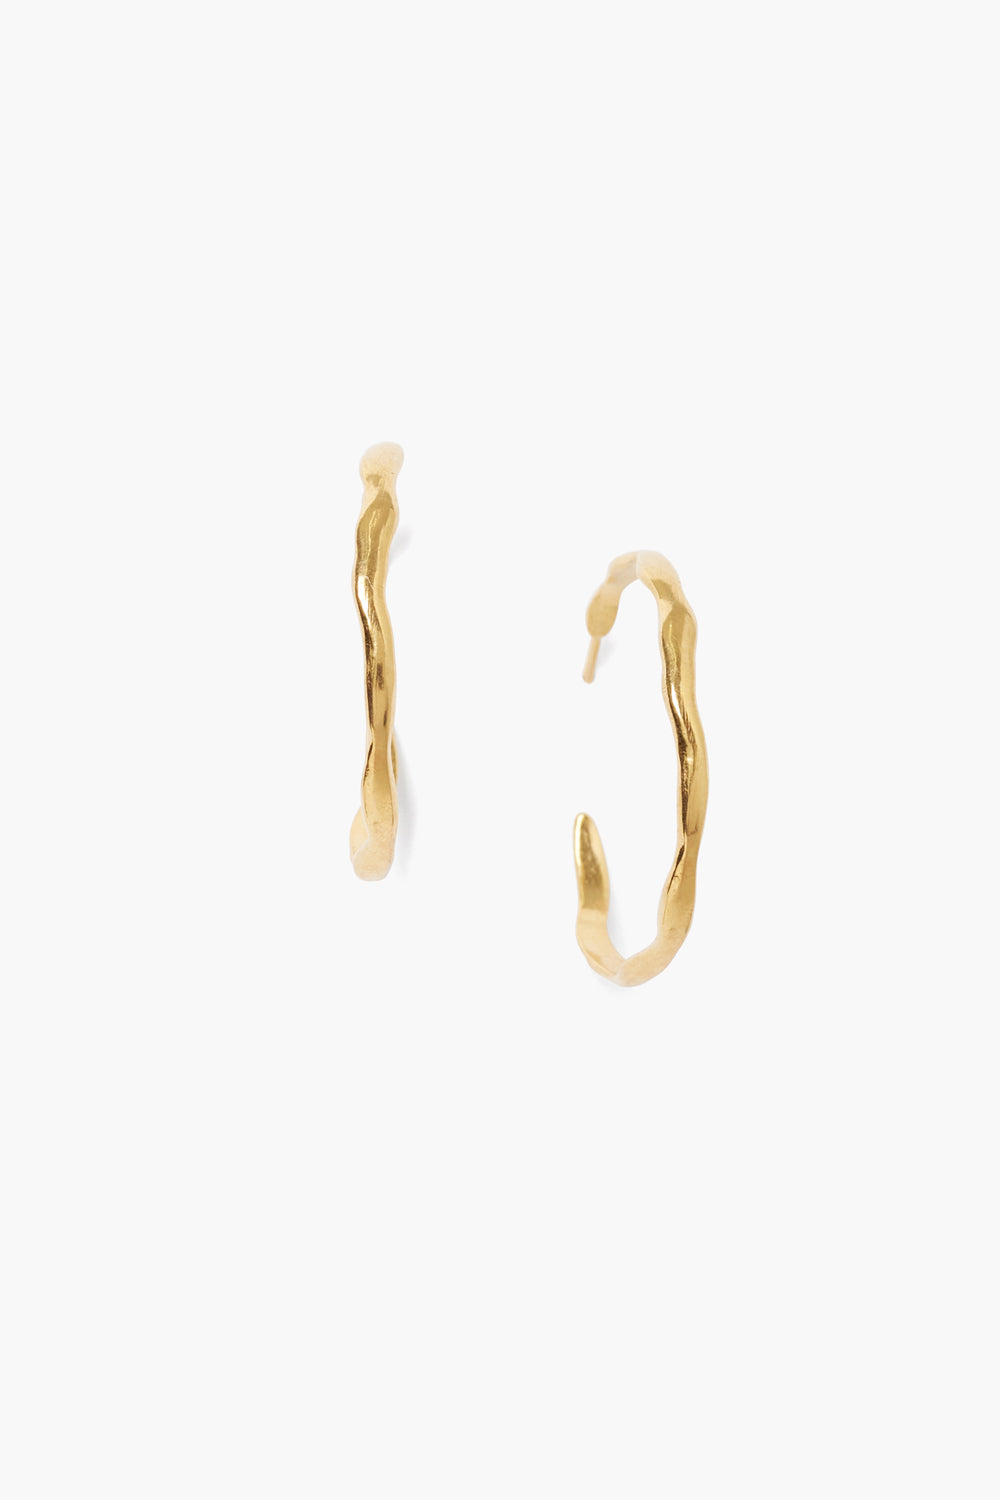 YELLOW GOLD WAVY HOOP EARRING - Kingfisher Road - Online Boutique